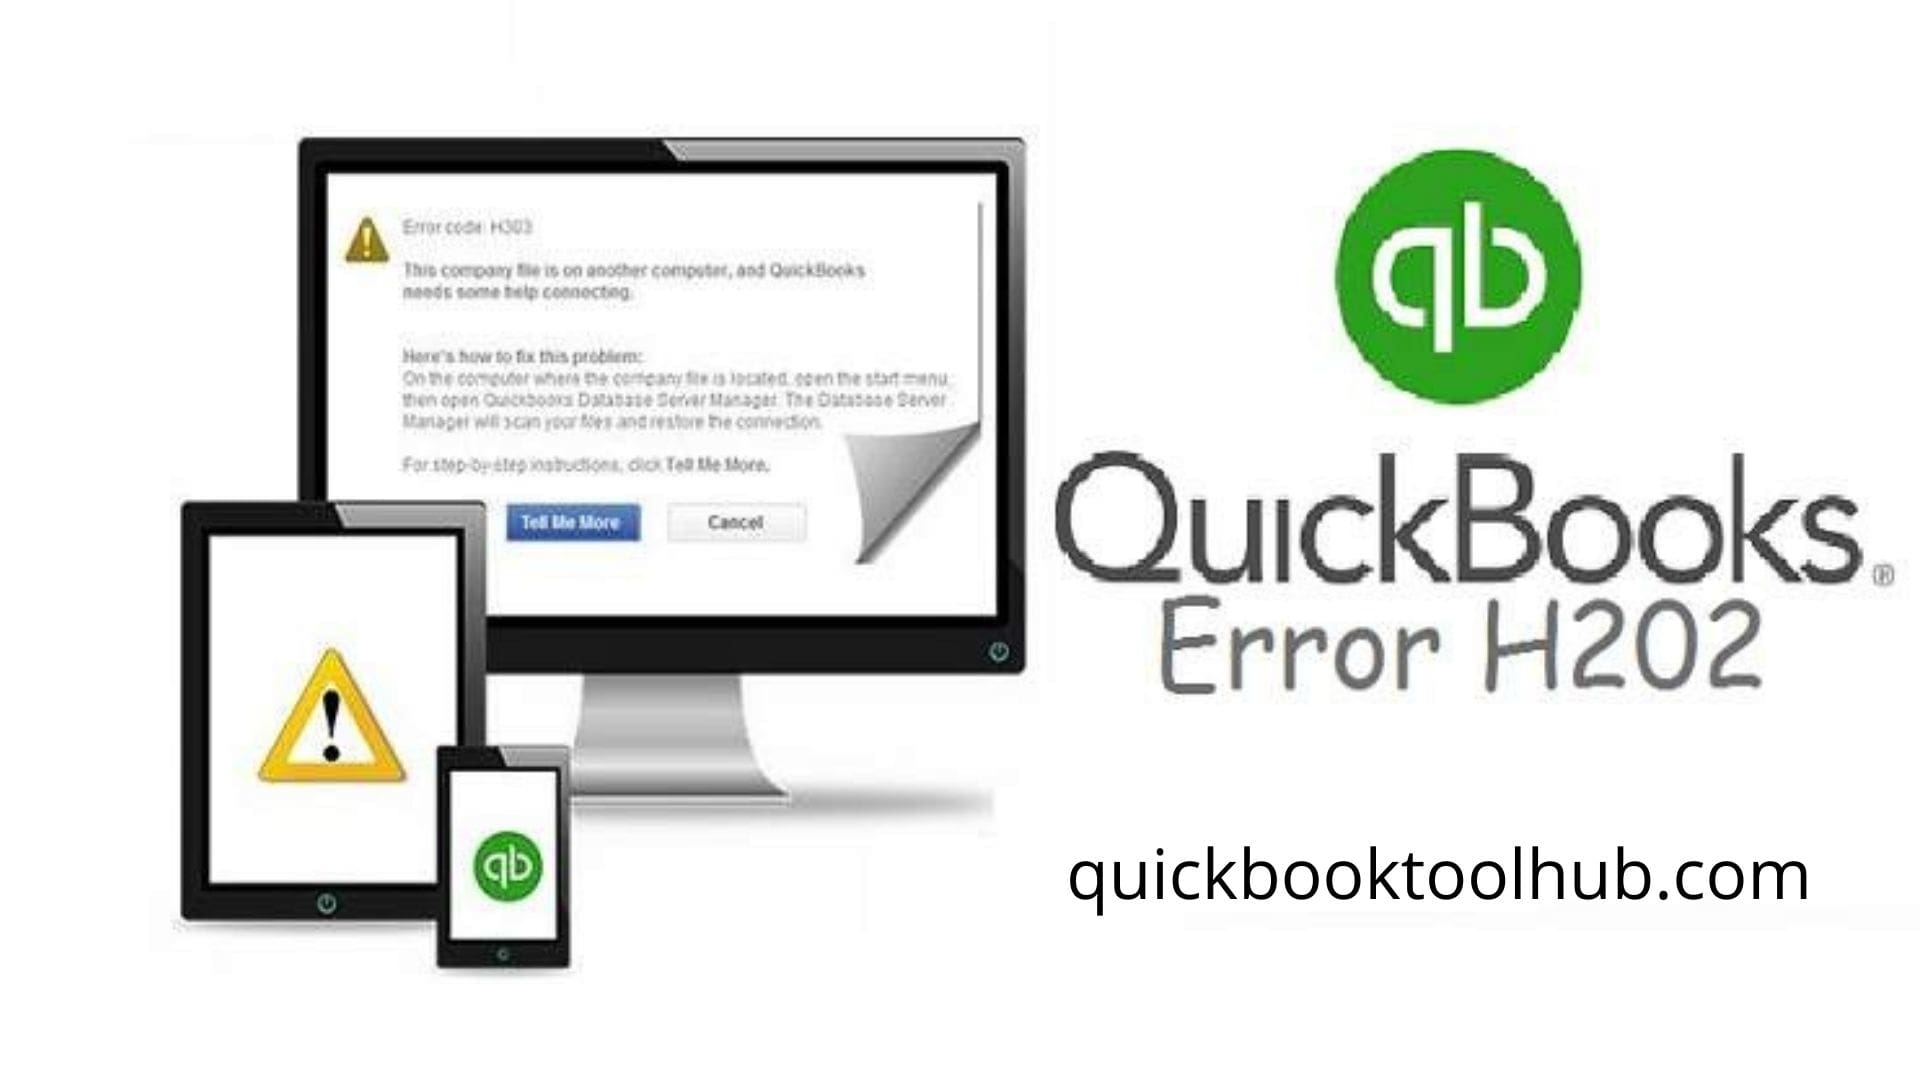 Quickbooks error H202: How to eliminate in simple steps